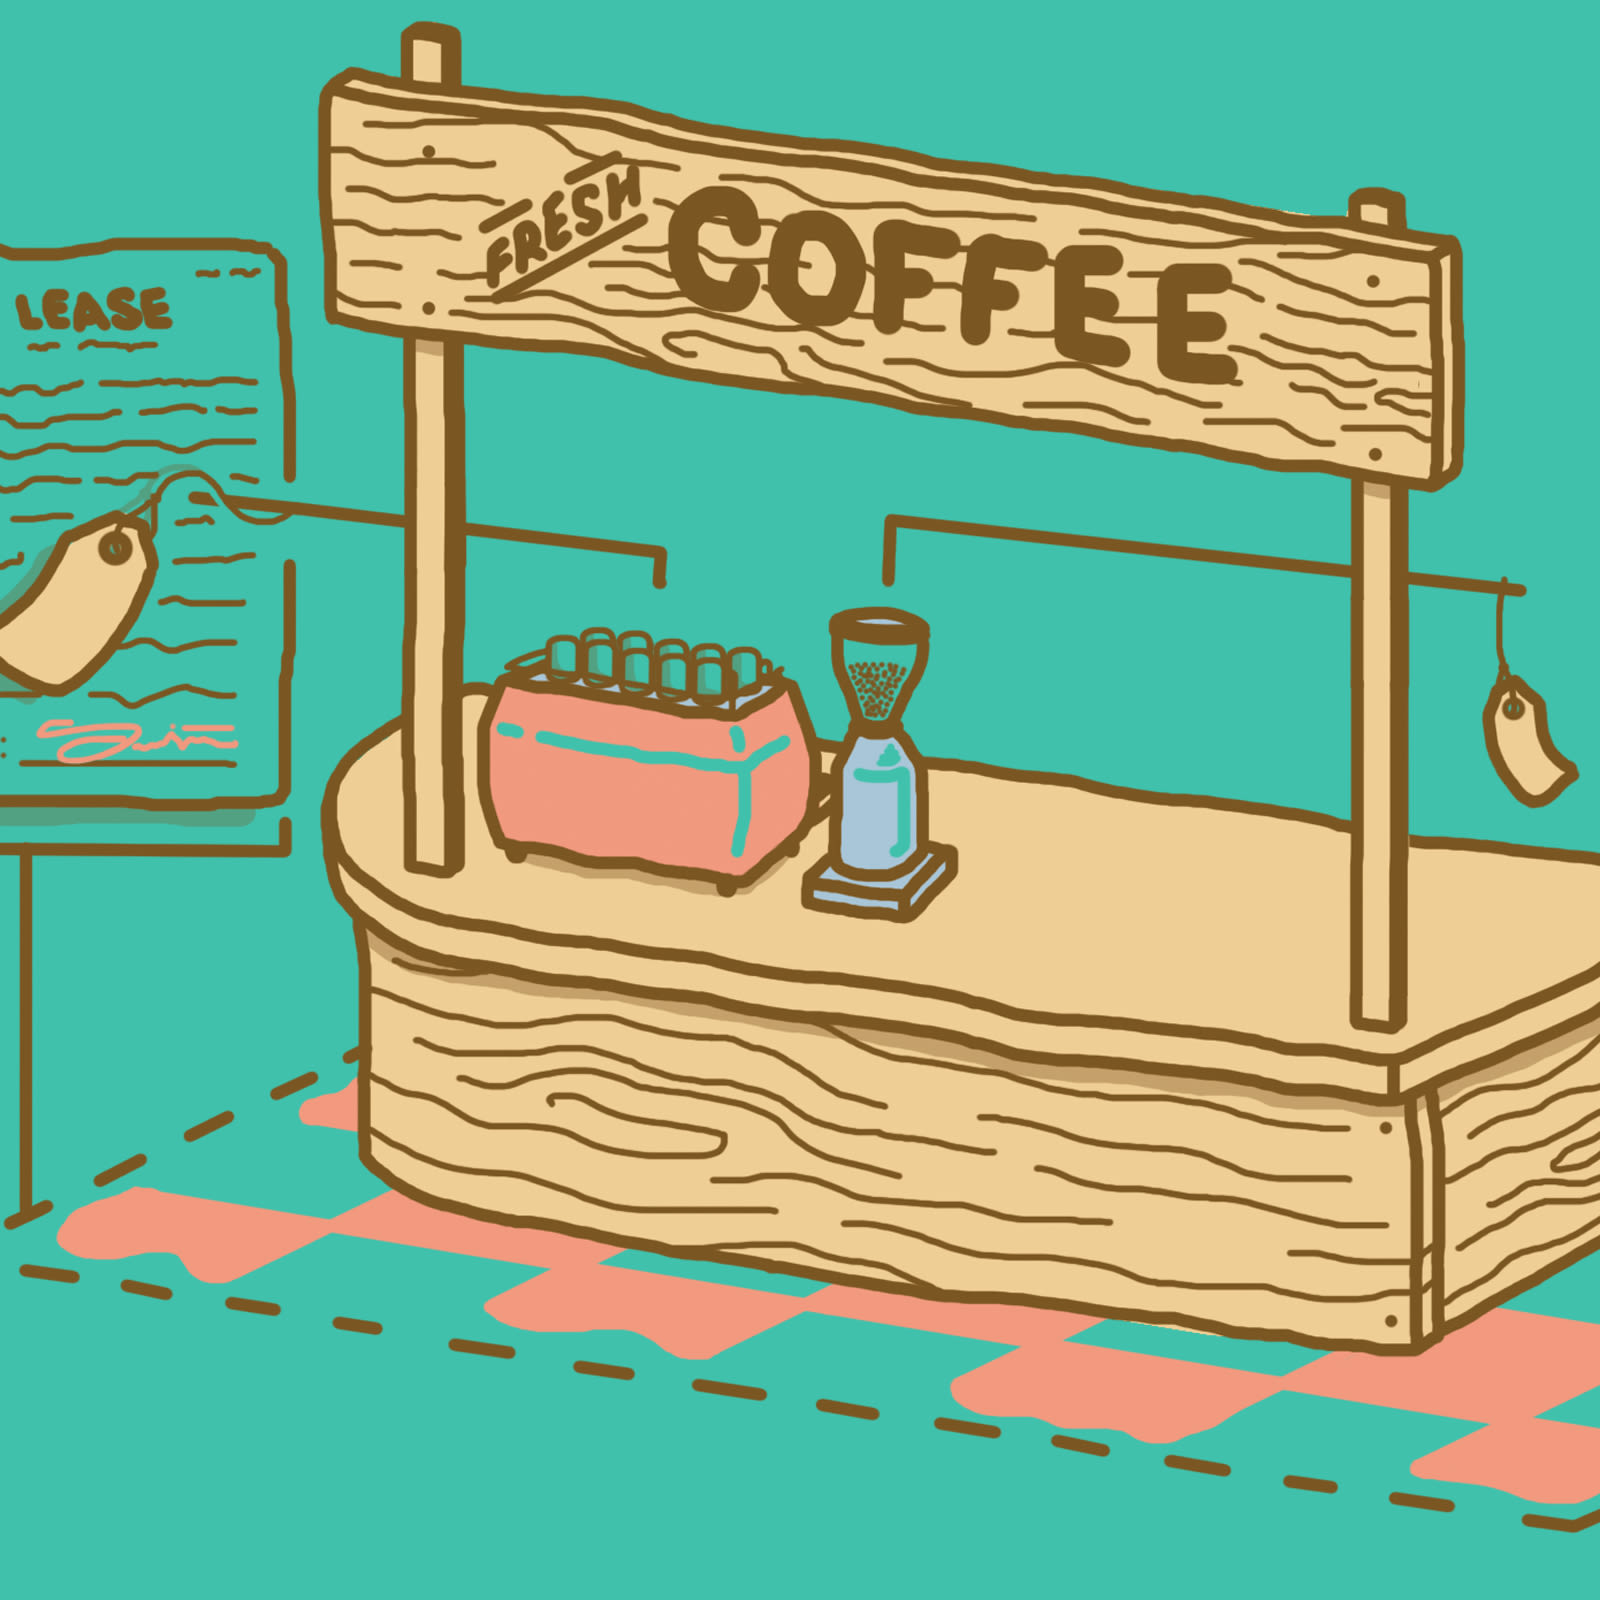 What does it take to run a cafe?